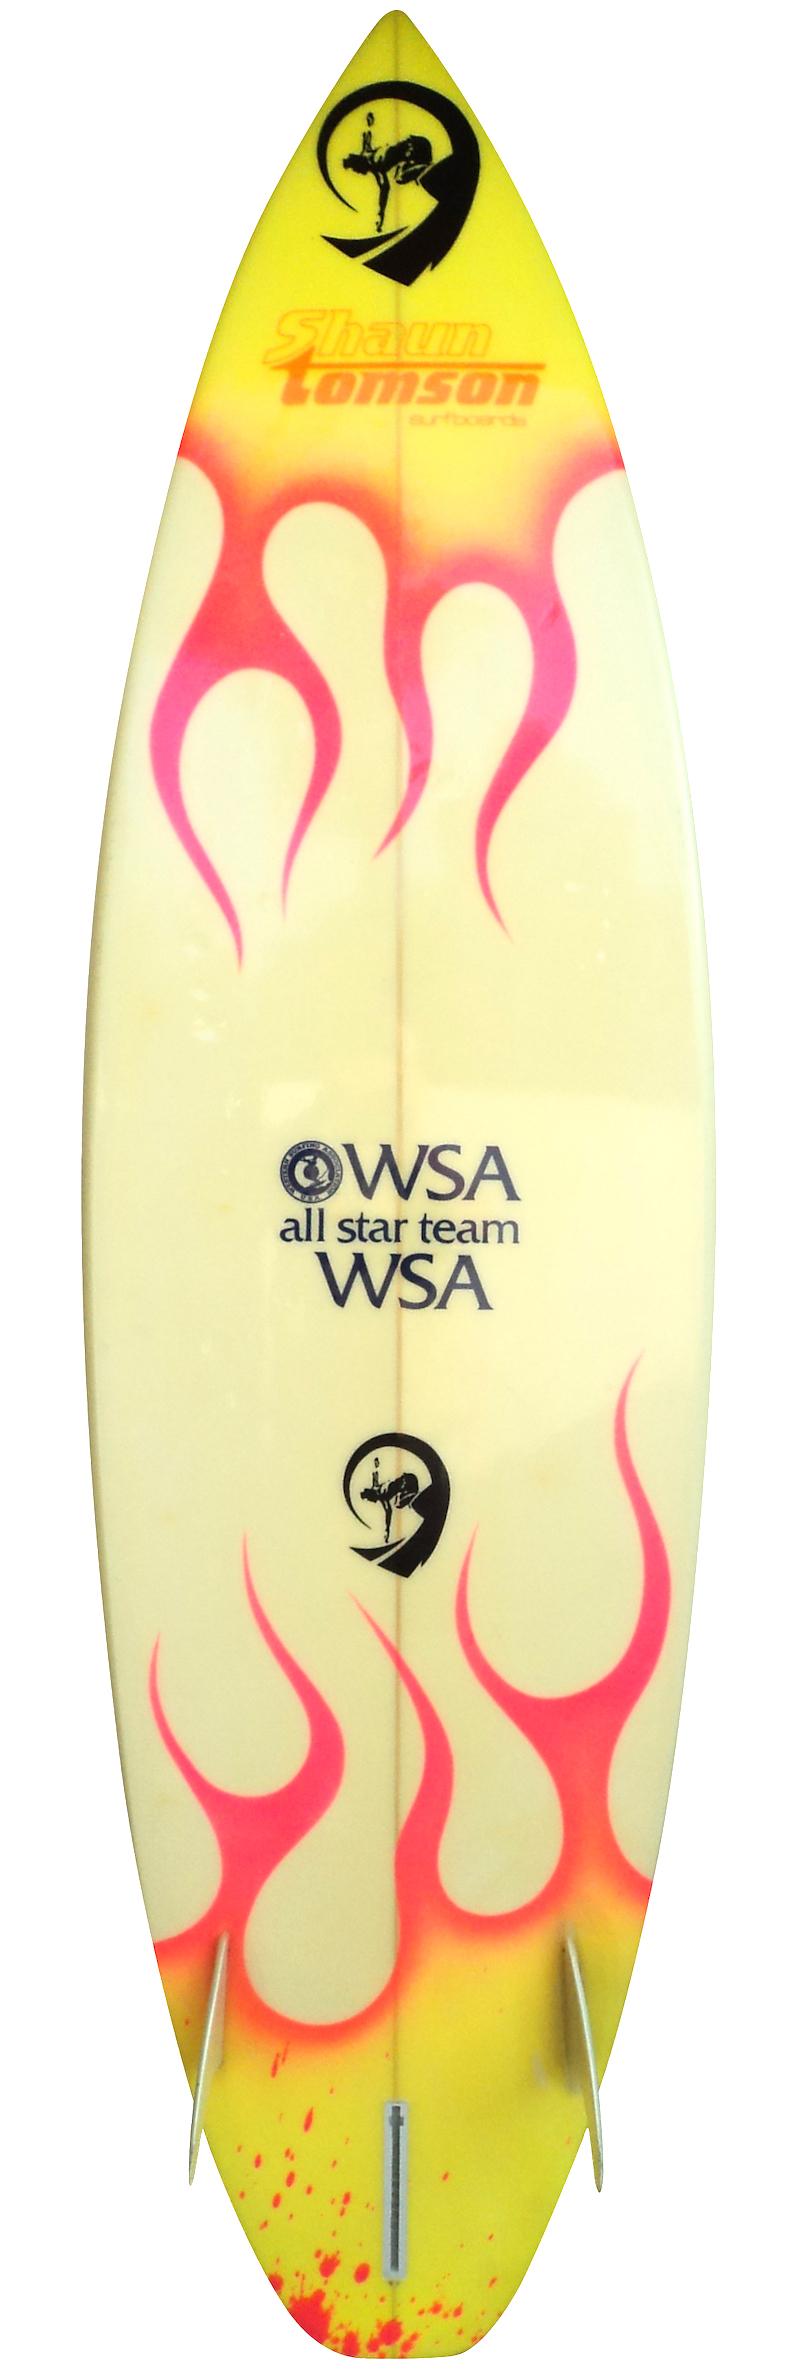 Mid 1980s Shaun Tomson WSA All Star Team 2+1 surfboard shaped by Don Kadowaki. Features an airbrushed flame design with Batman theme traction pad. WSA All Star Team surfboard bag included in the sale. A fantastic example of a 1980s vintage team